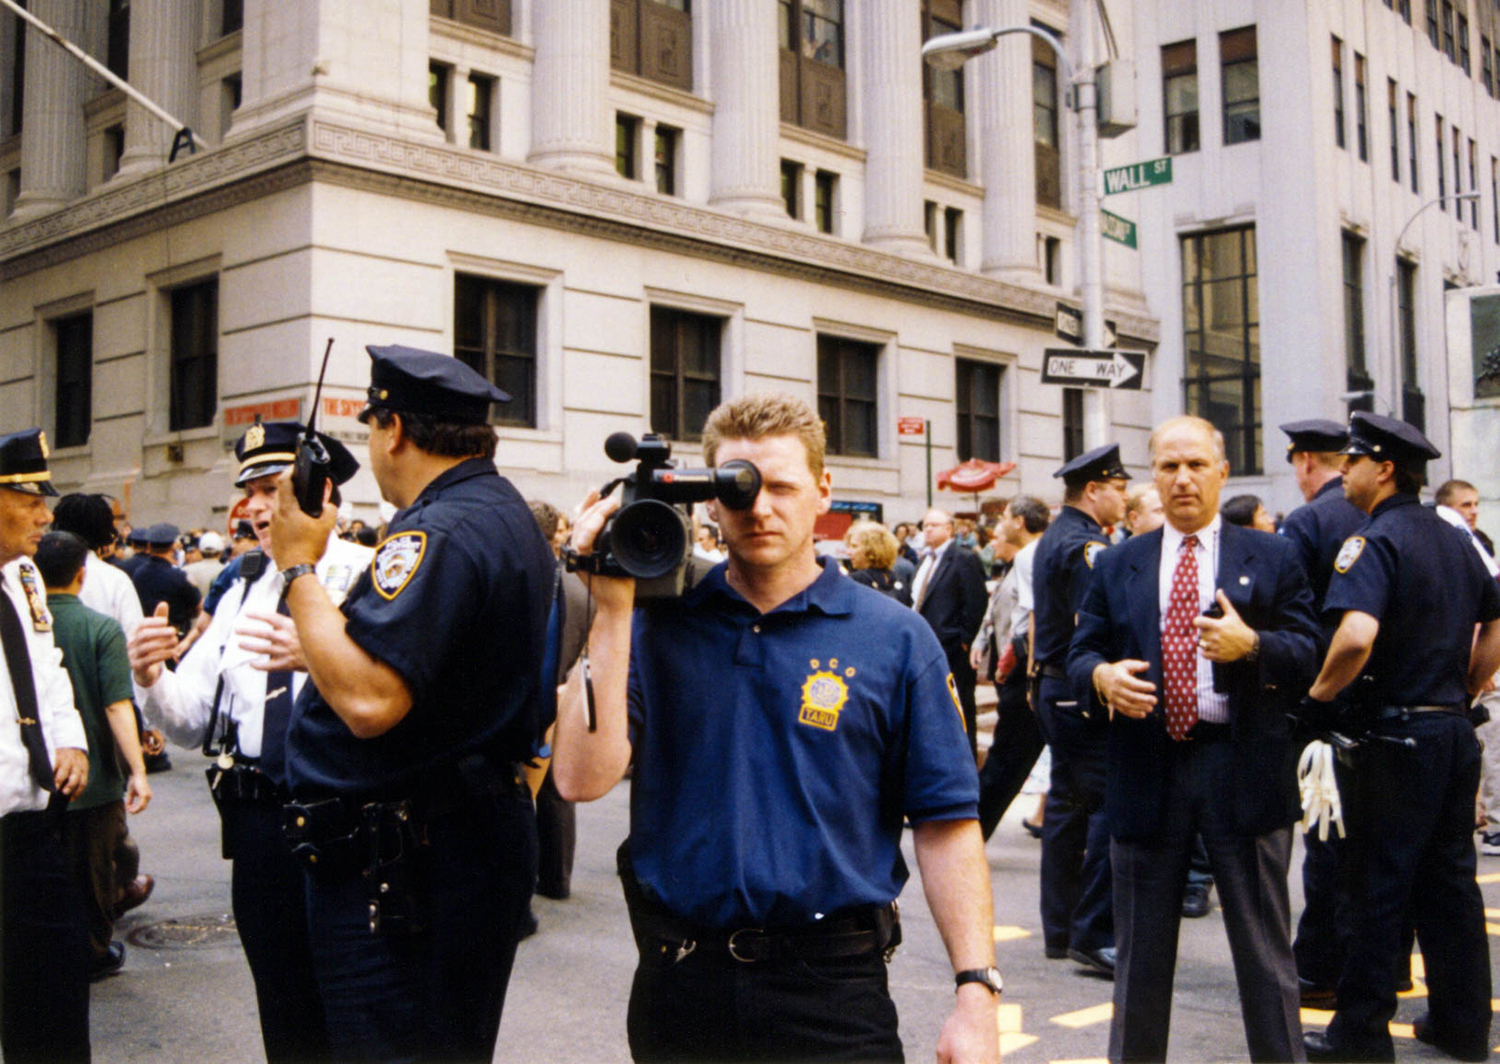 <p>The NYPD blue are quick to turn out in defence of the white collars of Wall Street. Here, police film, observe, and later arrest peaceful protestors outside the doors of the New York Stock Exchange.</p>